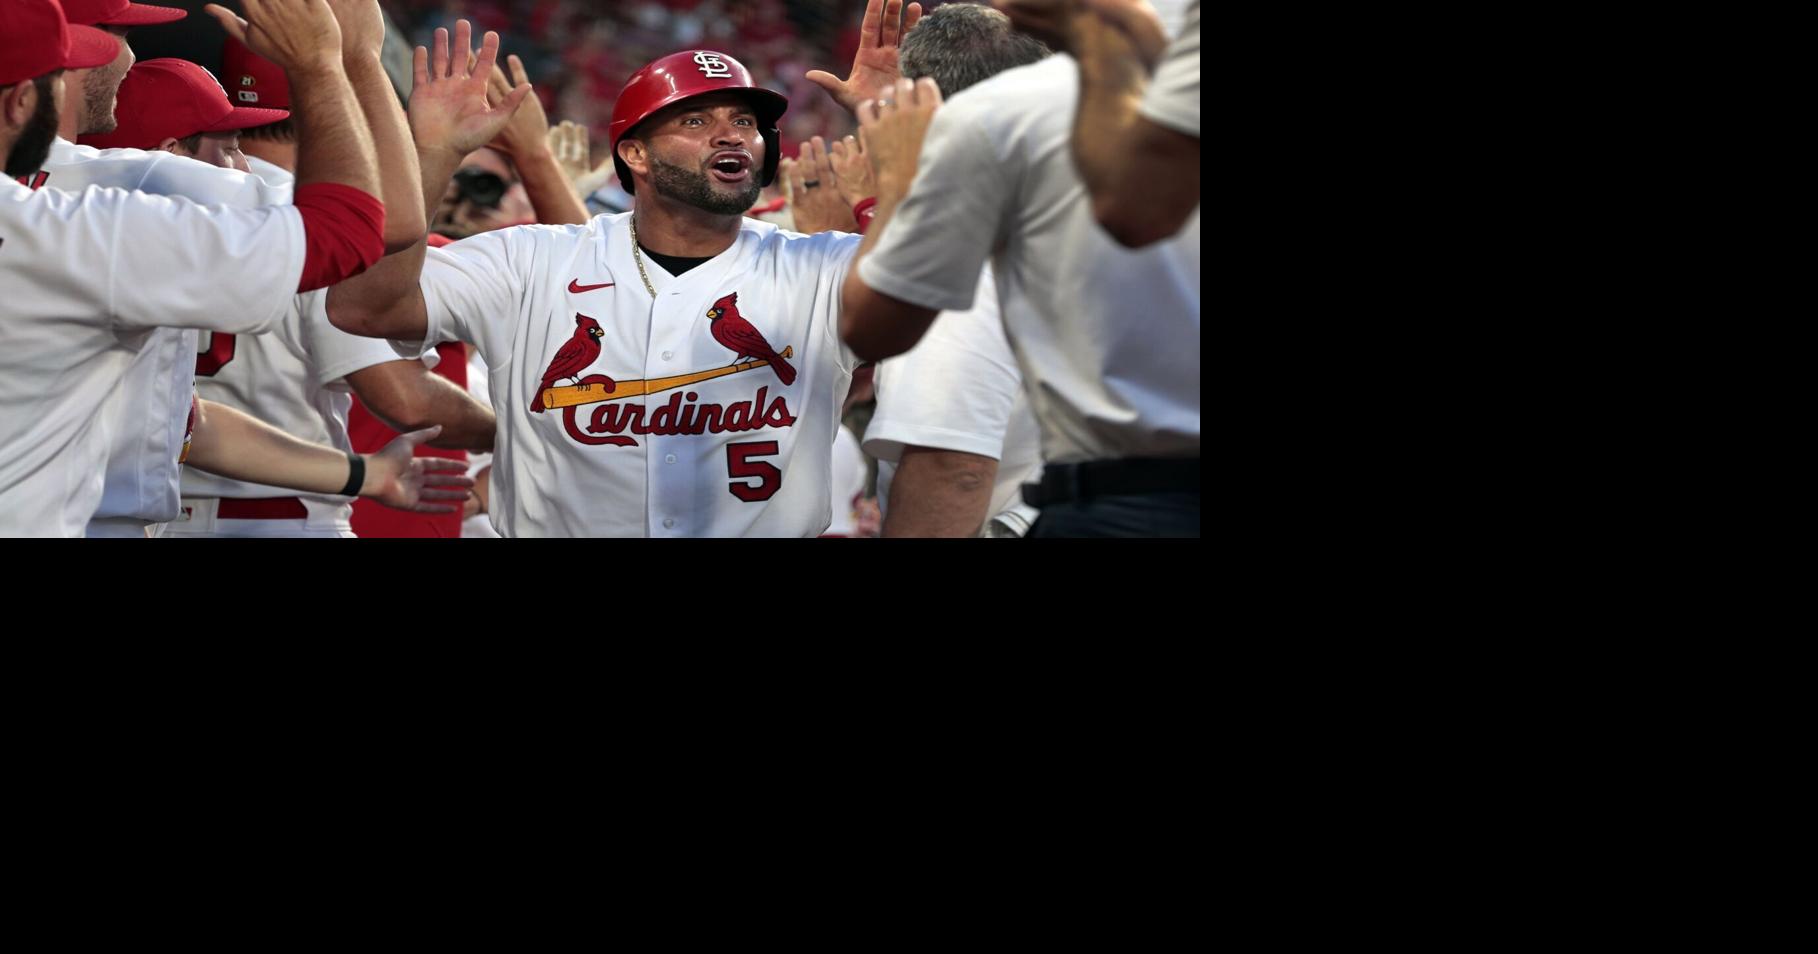 Albert Pujols surprised a young Cardinals fan by giving away jersey